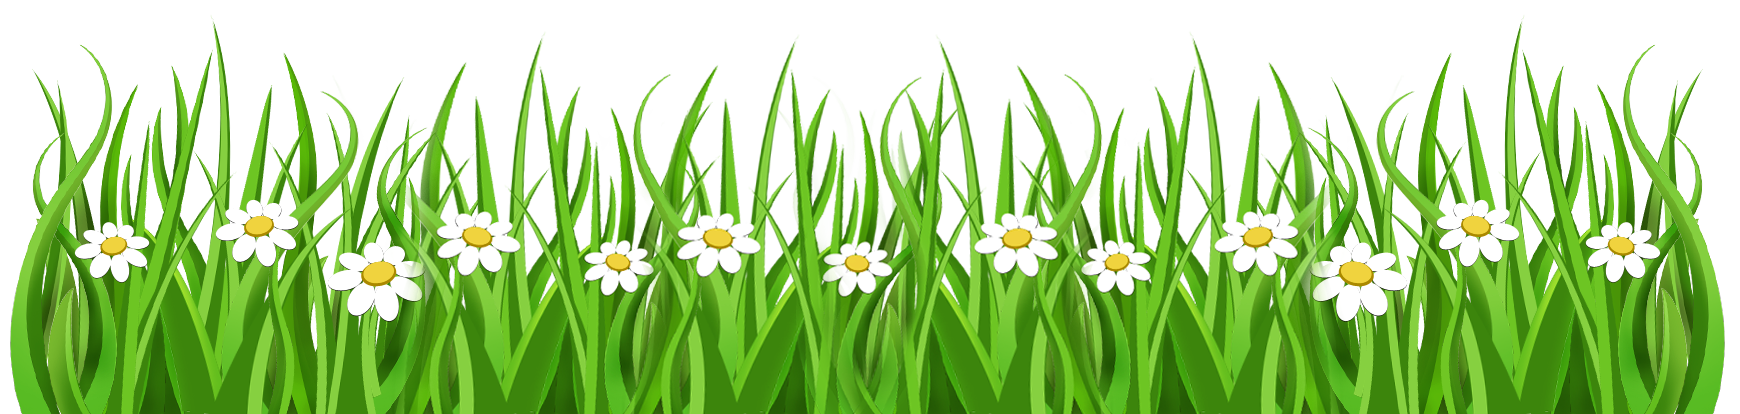 Grass clipart free clipart images clipartcow